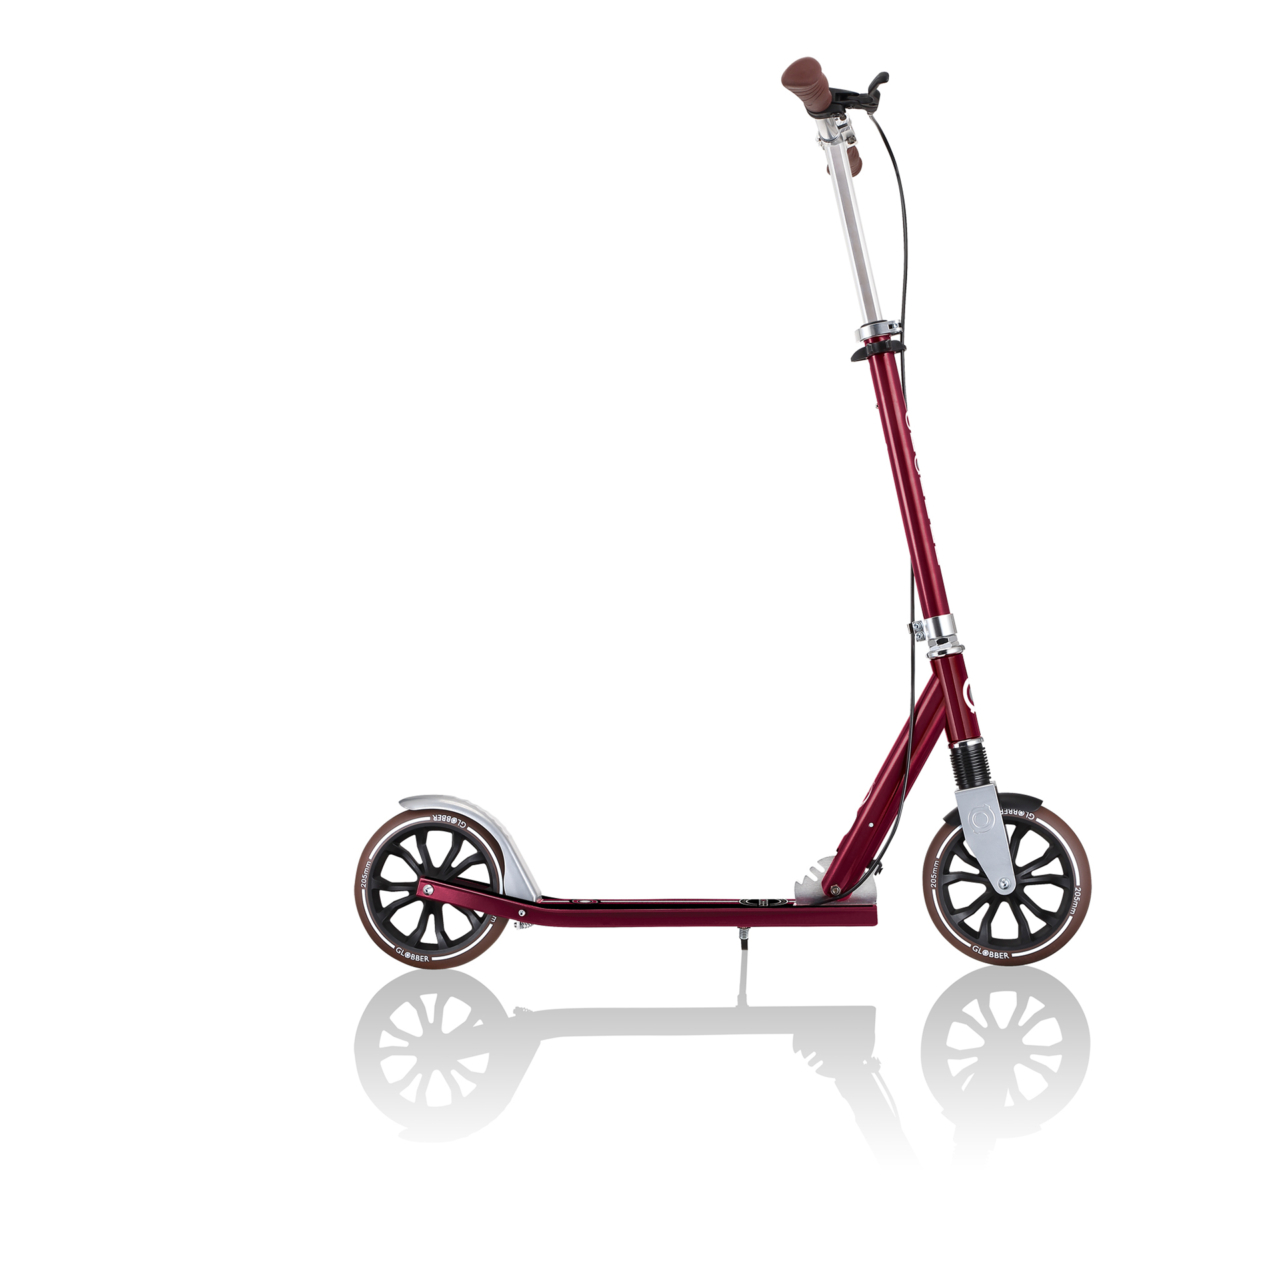 685 102 Collapsible 2 Wheel Scooter